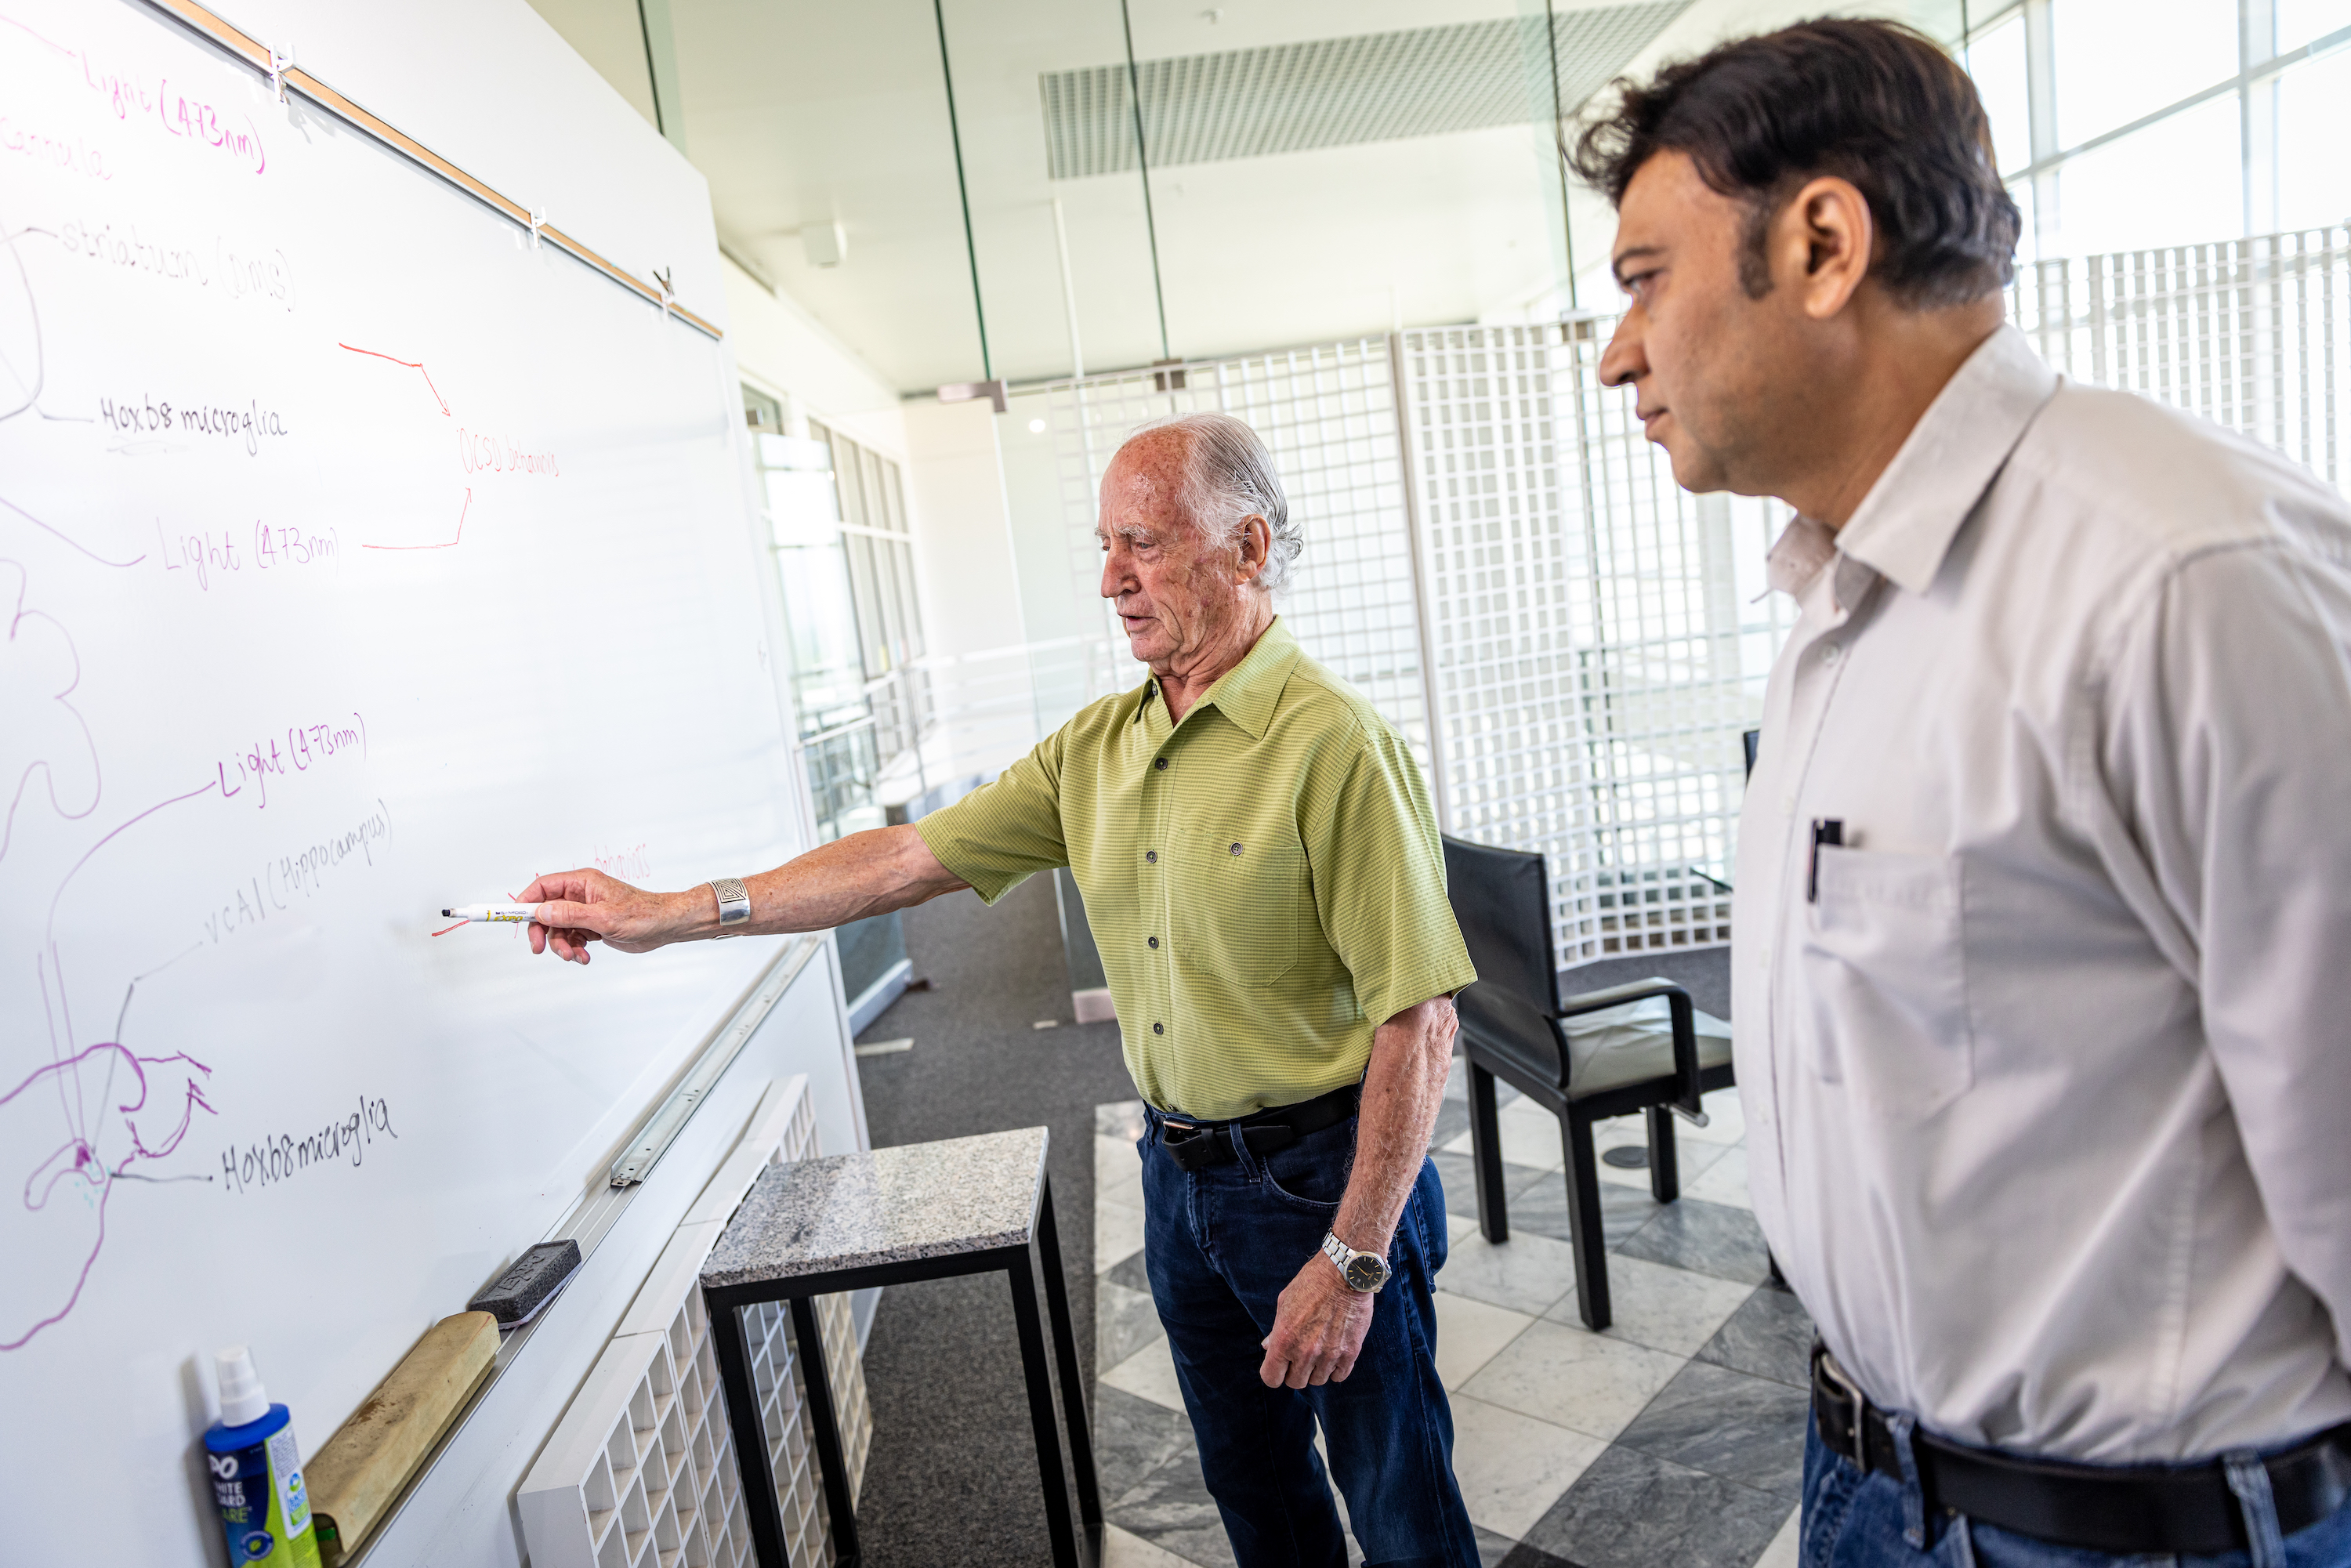 Distinguished Professor Mario Capecchi, Ph.D. and Naveen Nagarajan, Ph.D. writing on the white board.